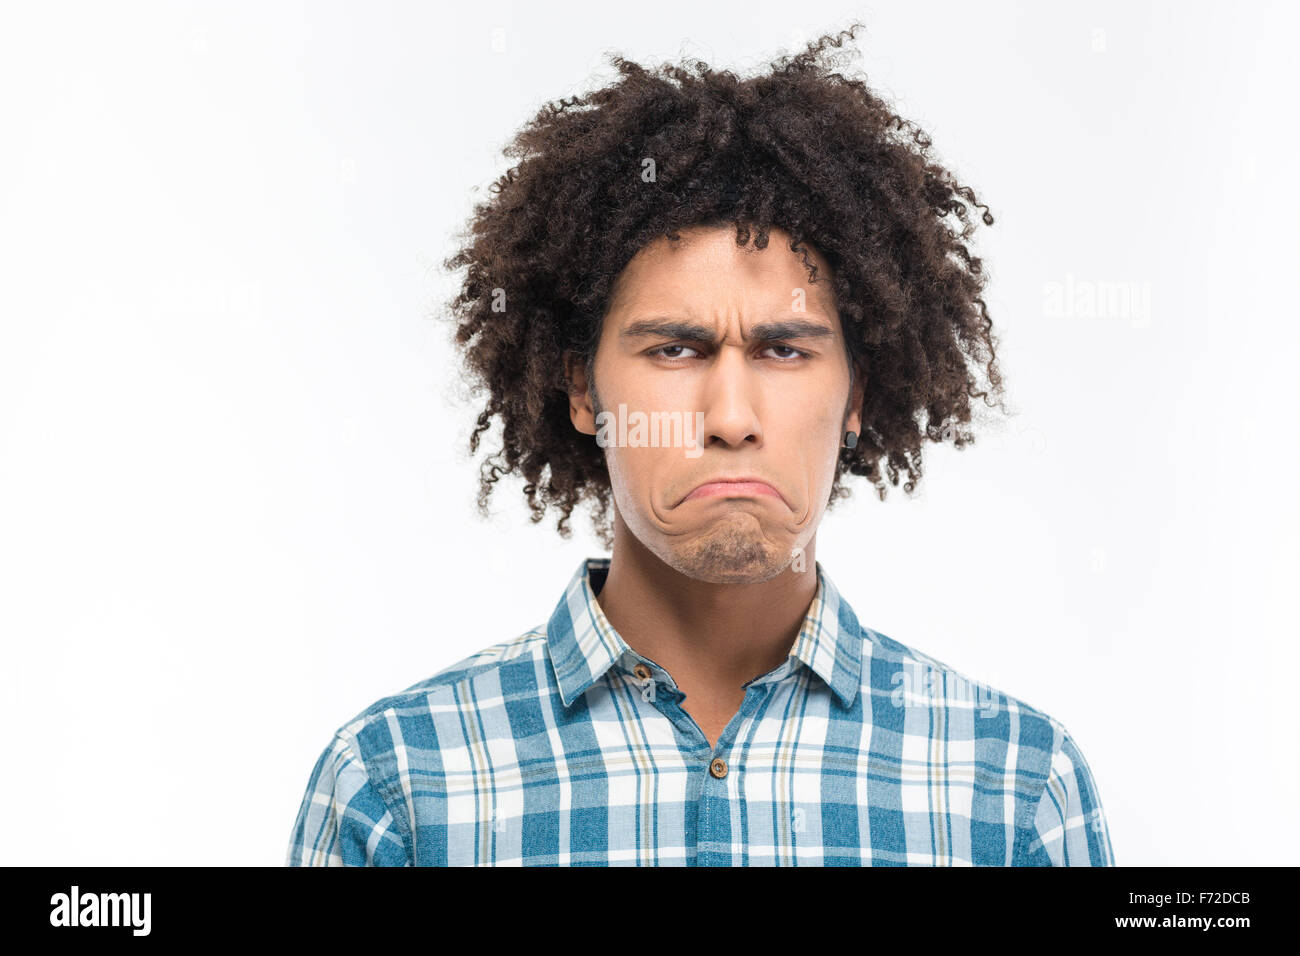 Portrait of a sad afro american man with curly hair looking at camera isolated on a white background Stock Photo